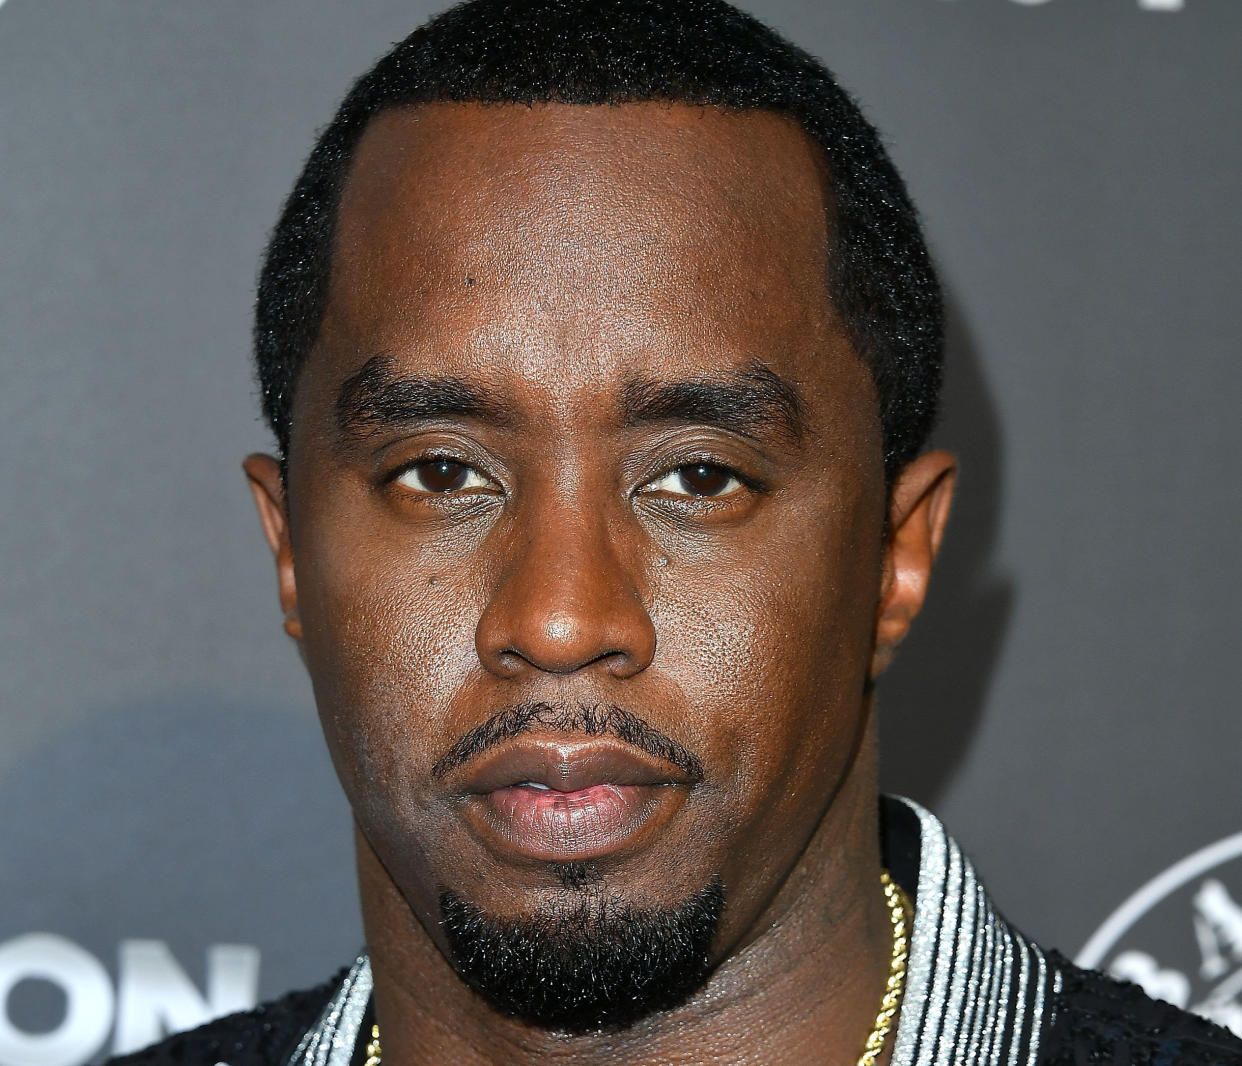 Sean “Diddy” Combs arrives at the Los Angeles Premiere Of "Can't Stop Won't Stop." (Steve Granitz via Getty Images)